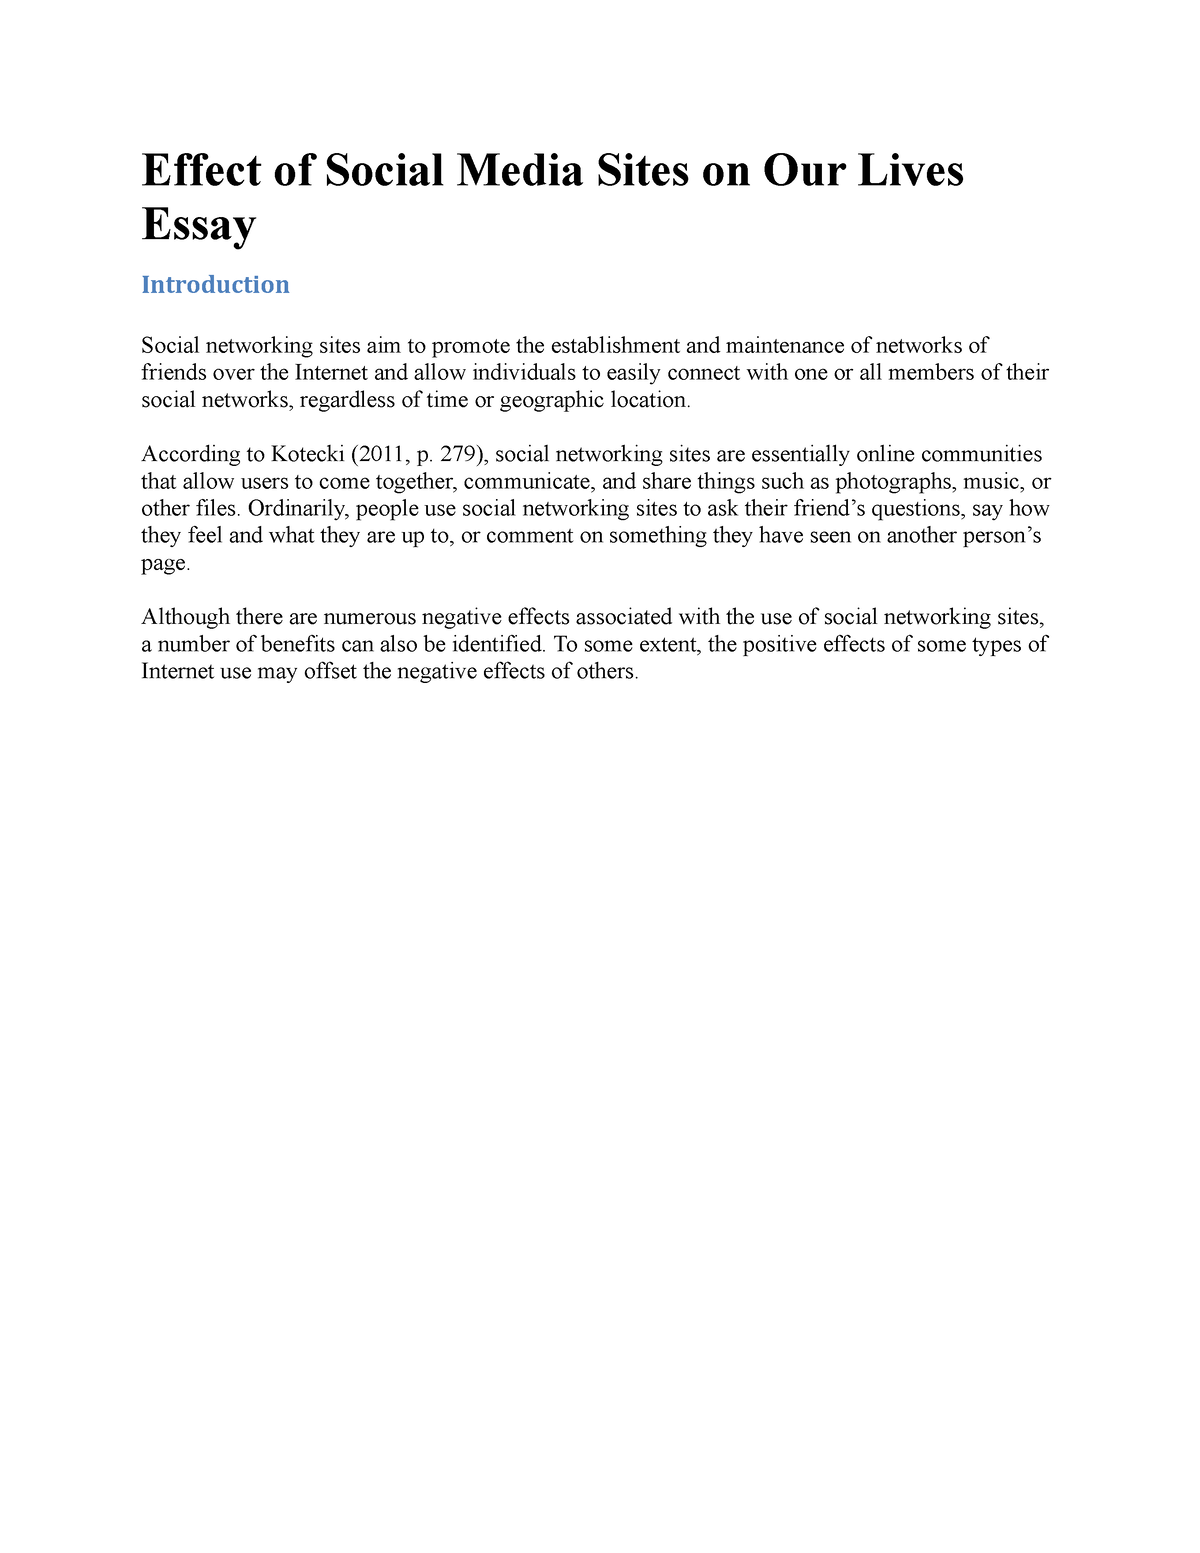 social media affects our lives essay